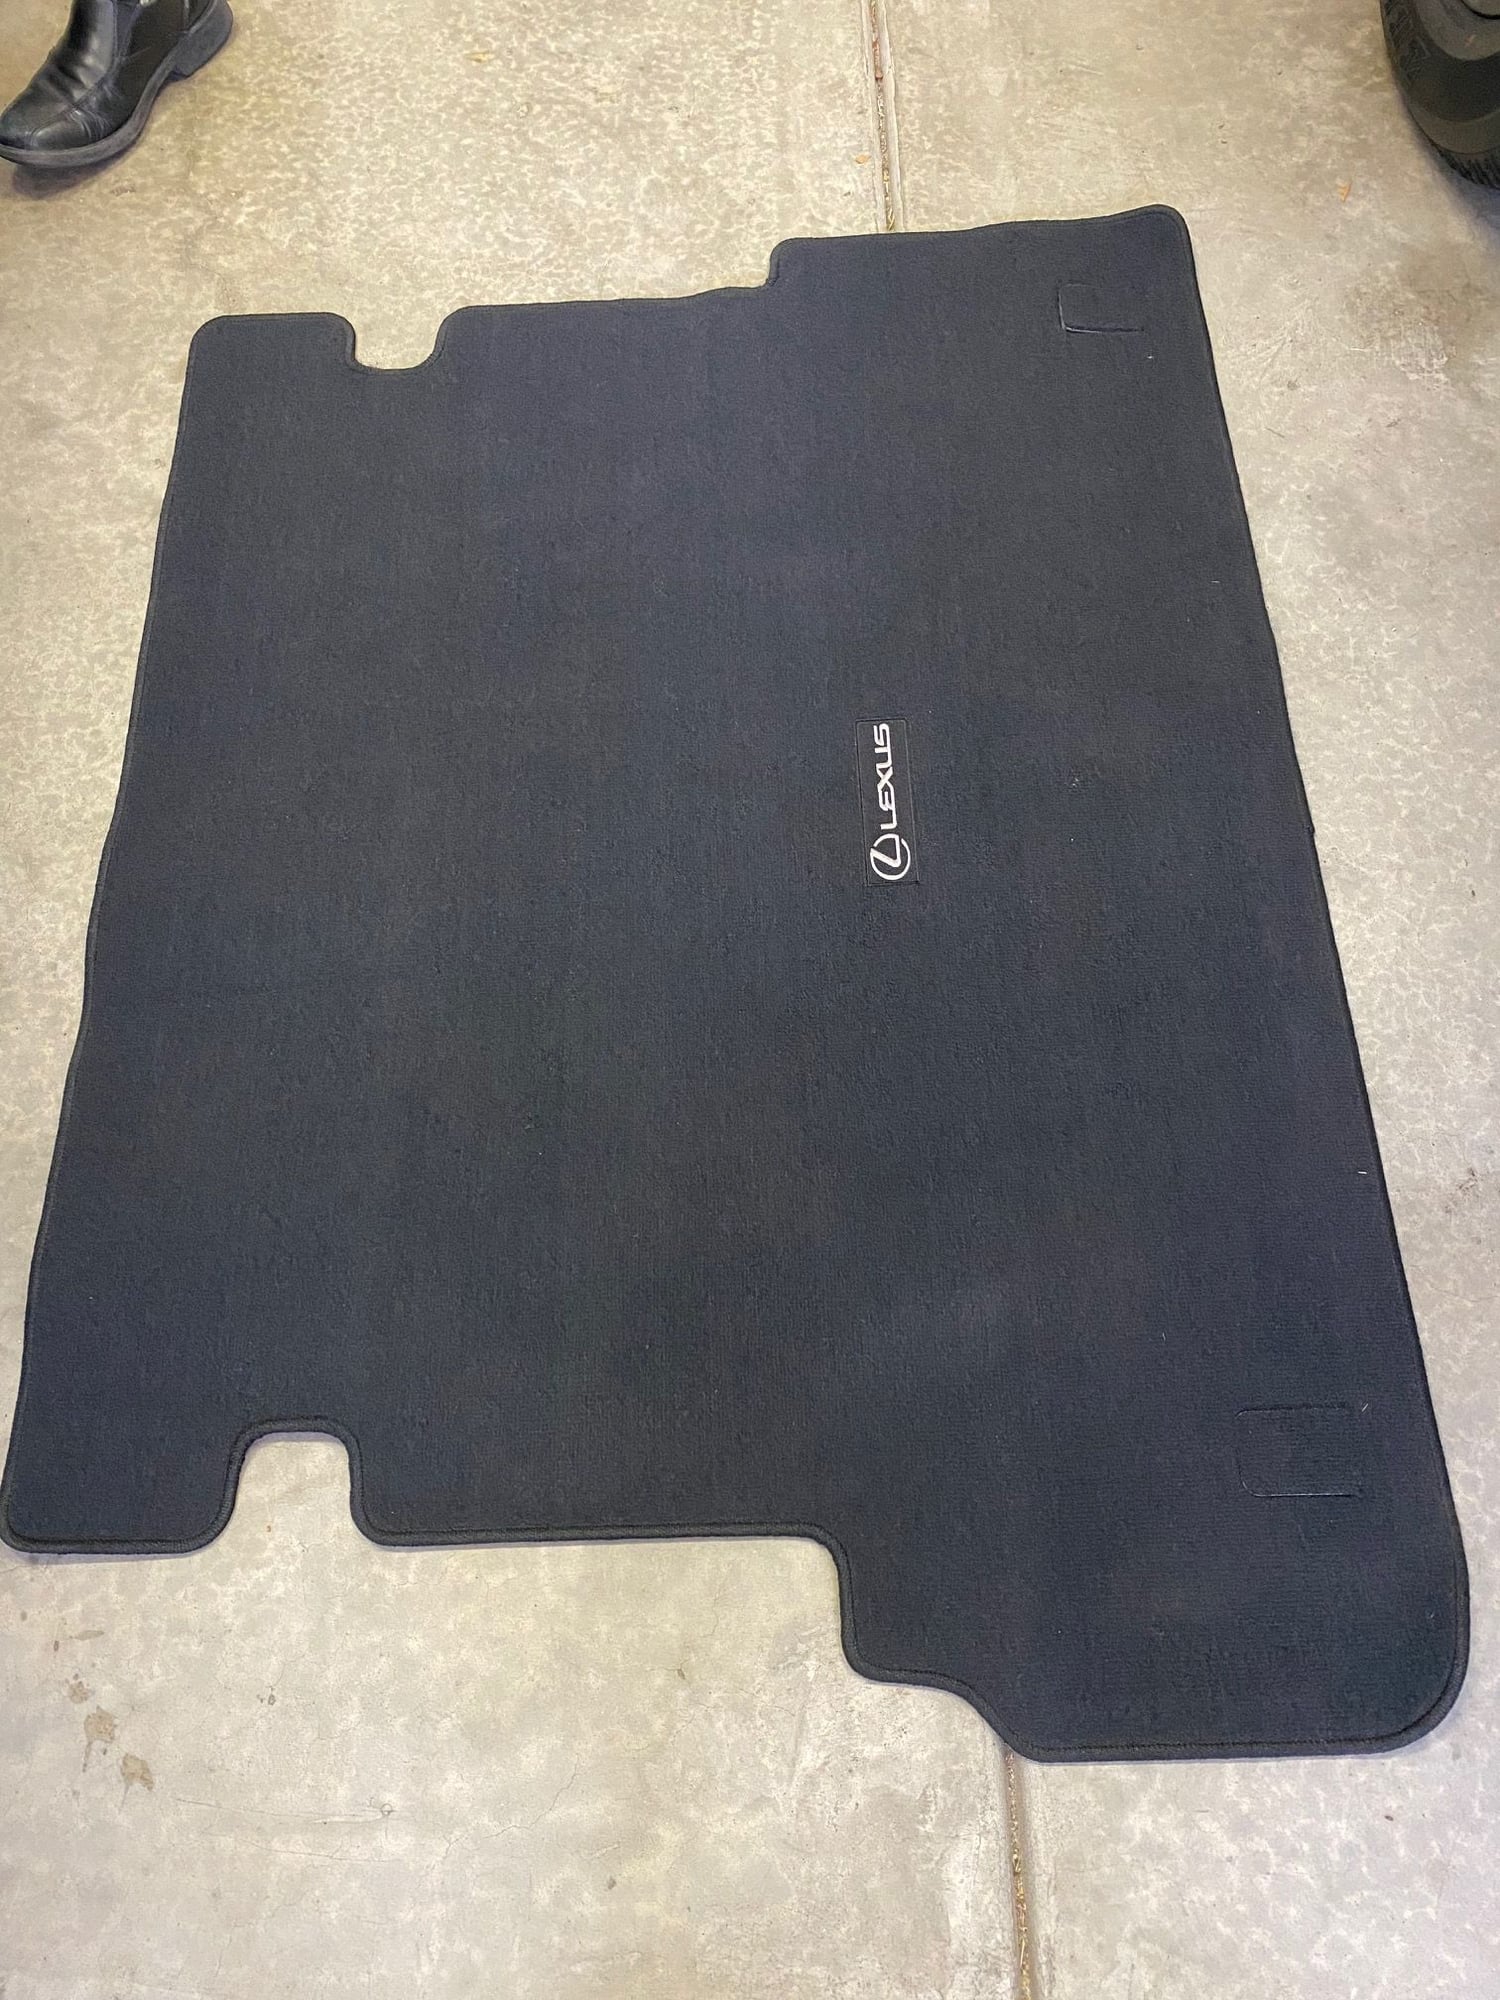 Interior/Upholstery - Tonneau Cover, Trunk Mat - Used - 2014 to 2021 Lexus GX460 - San Jacinto, CA 92583, United States